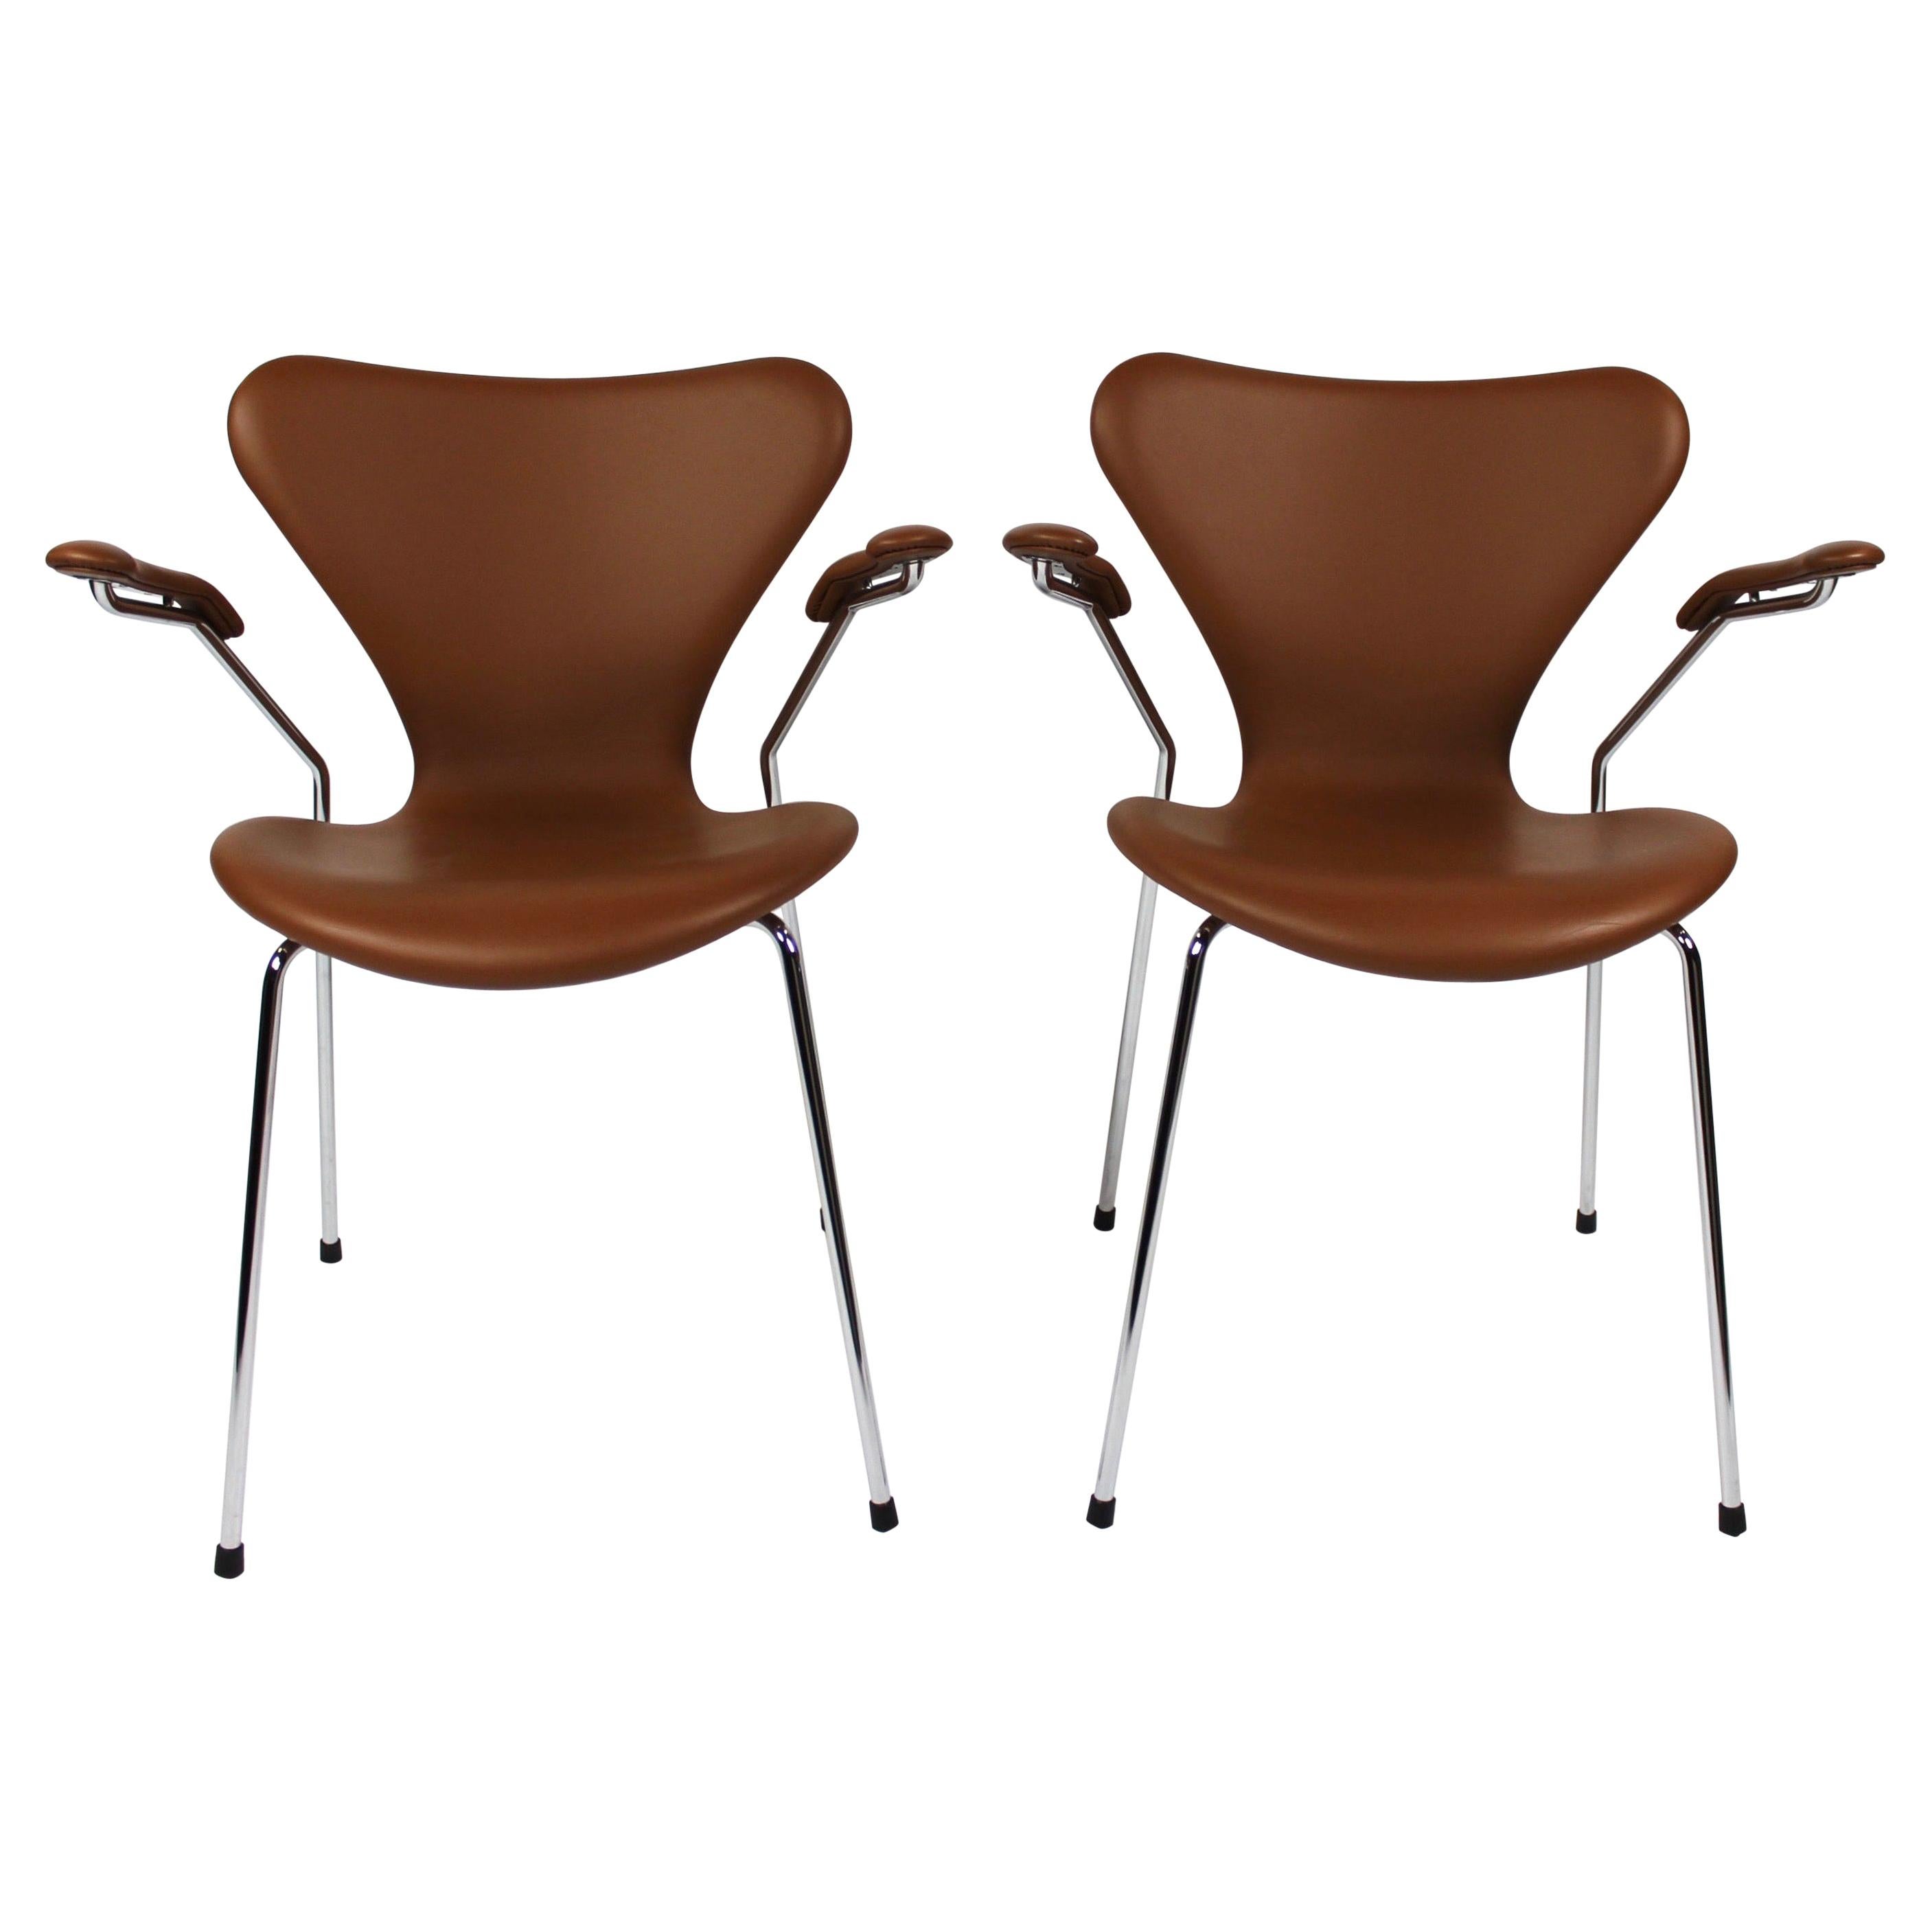 Set of Seven Chairs, Model 3207, with Armrests in Cognac Colored, 2019 For Sale